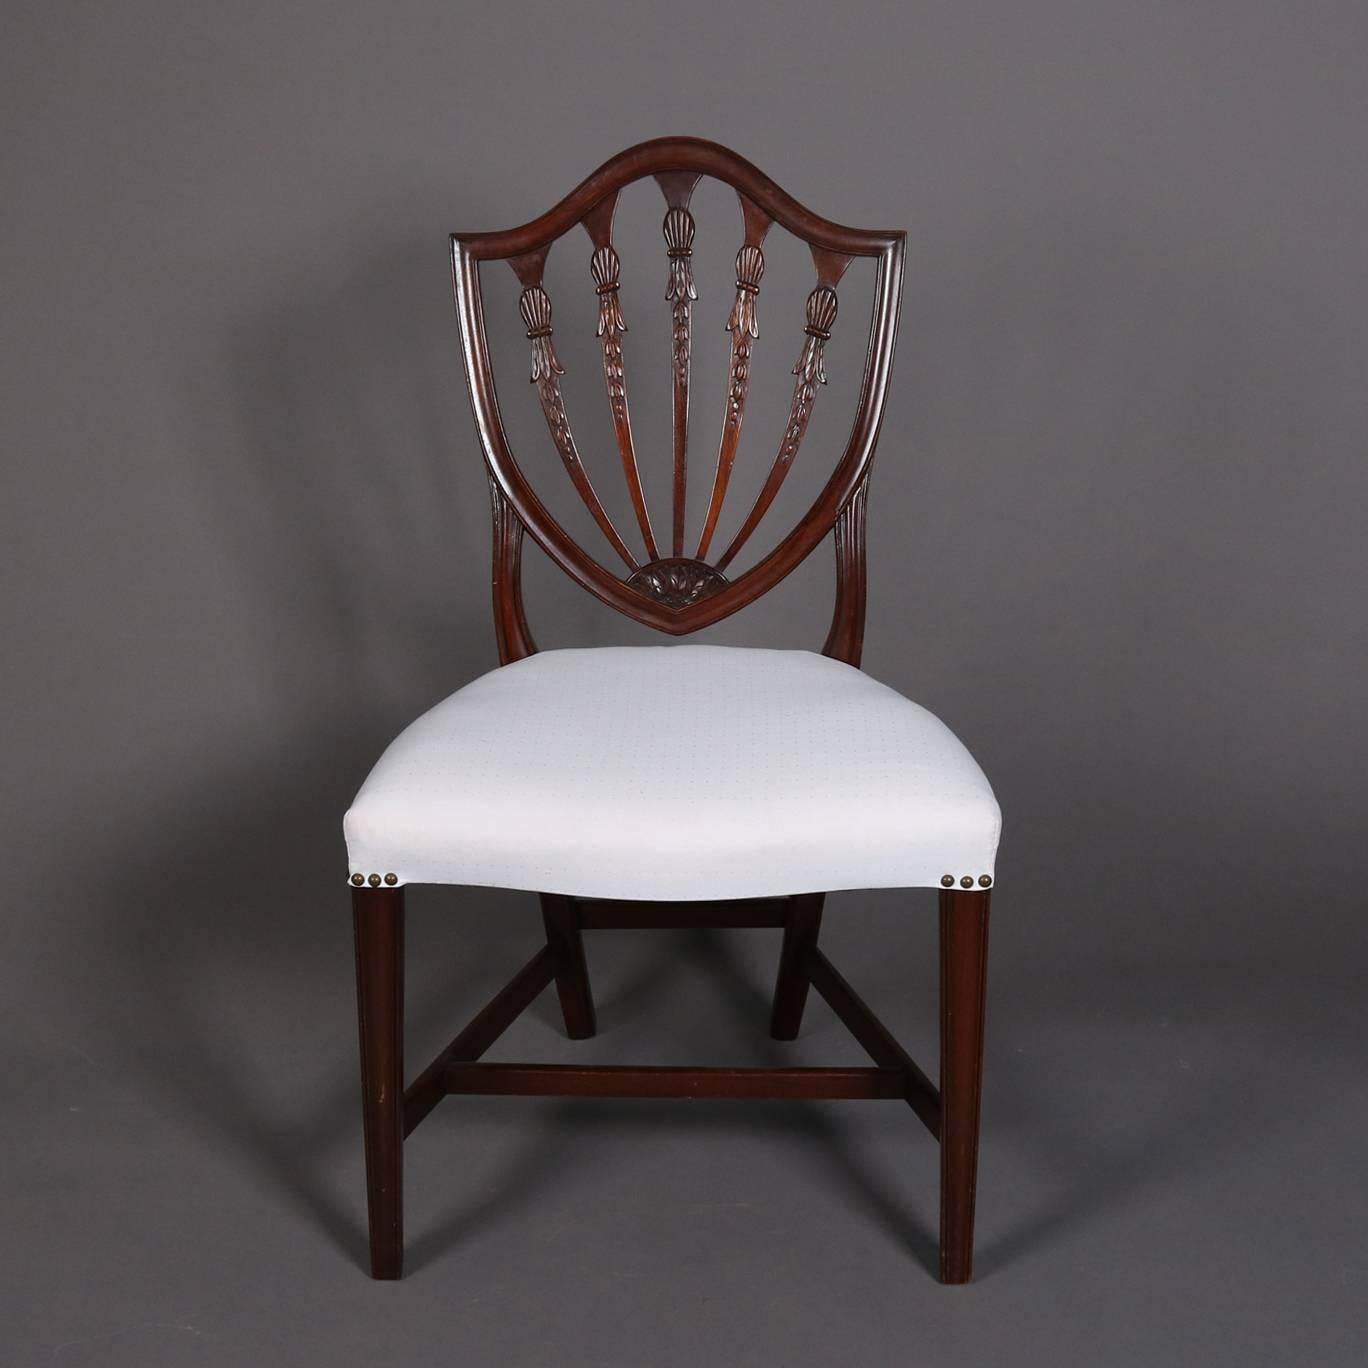 European Federal Carved Mahogany Upholstered Shield Back Dining Chairs, 20th Century